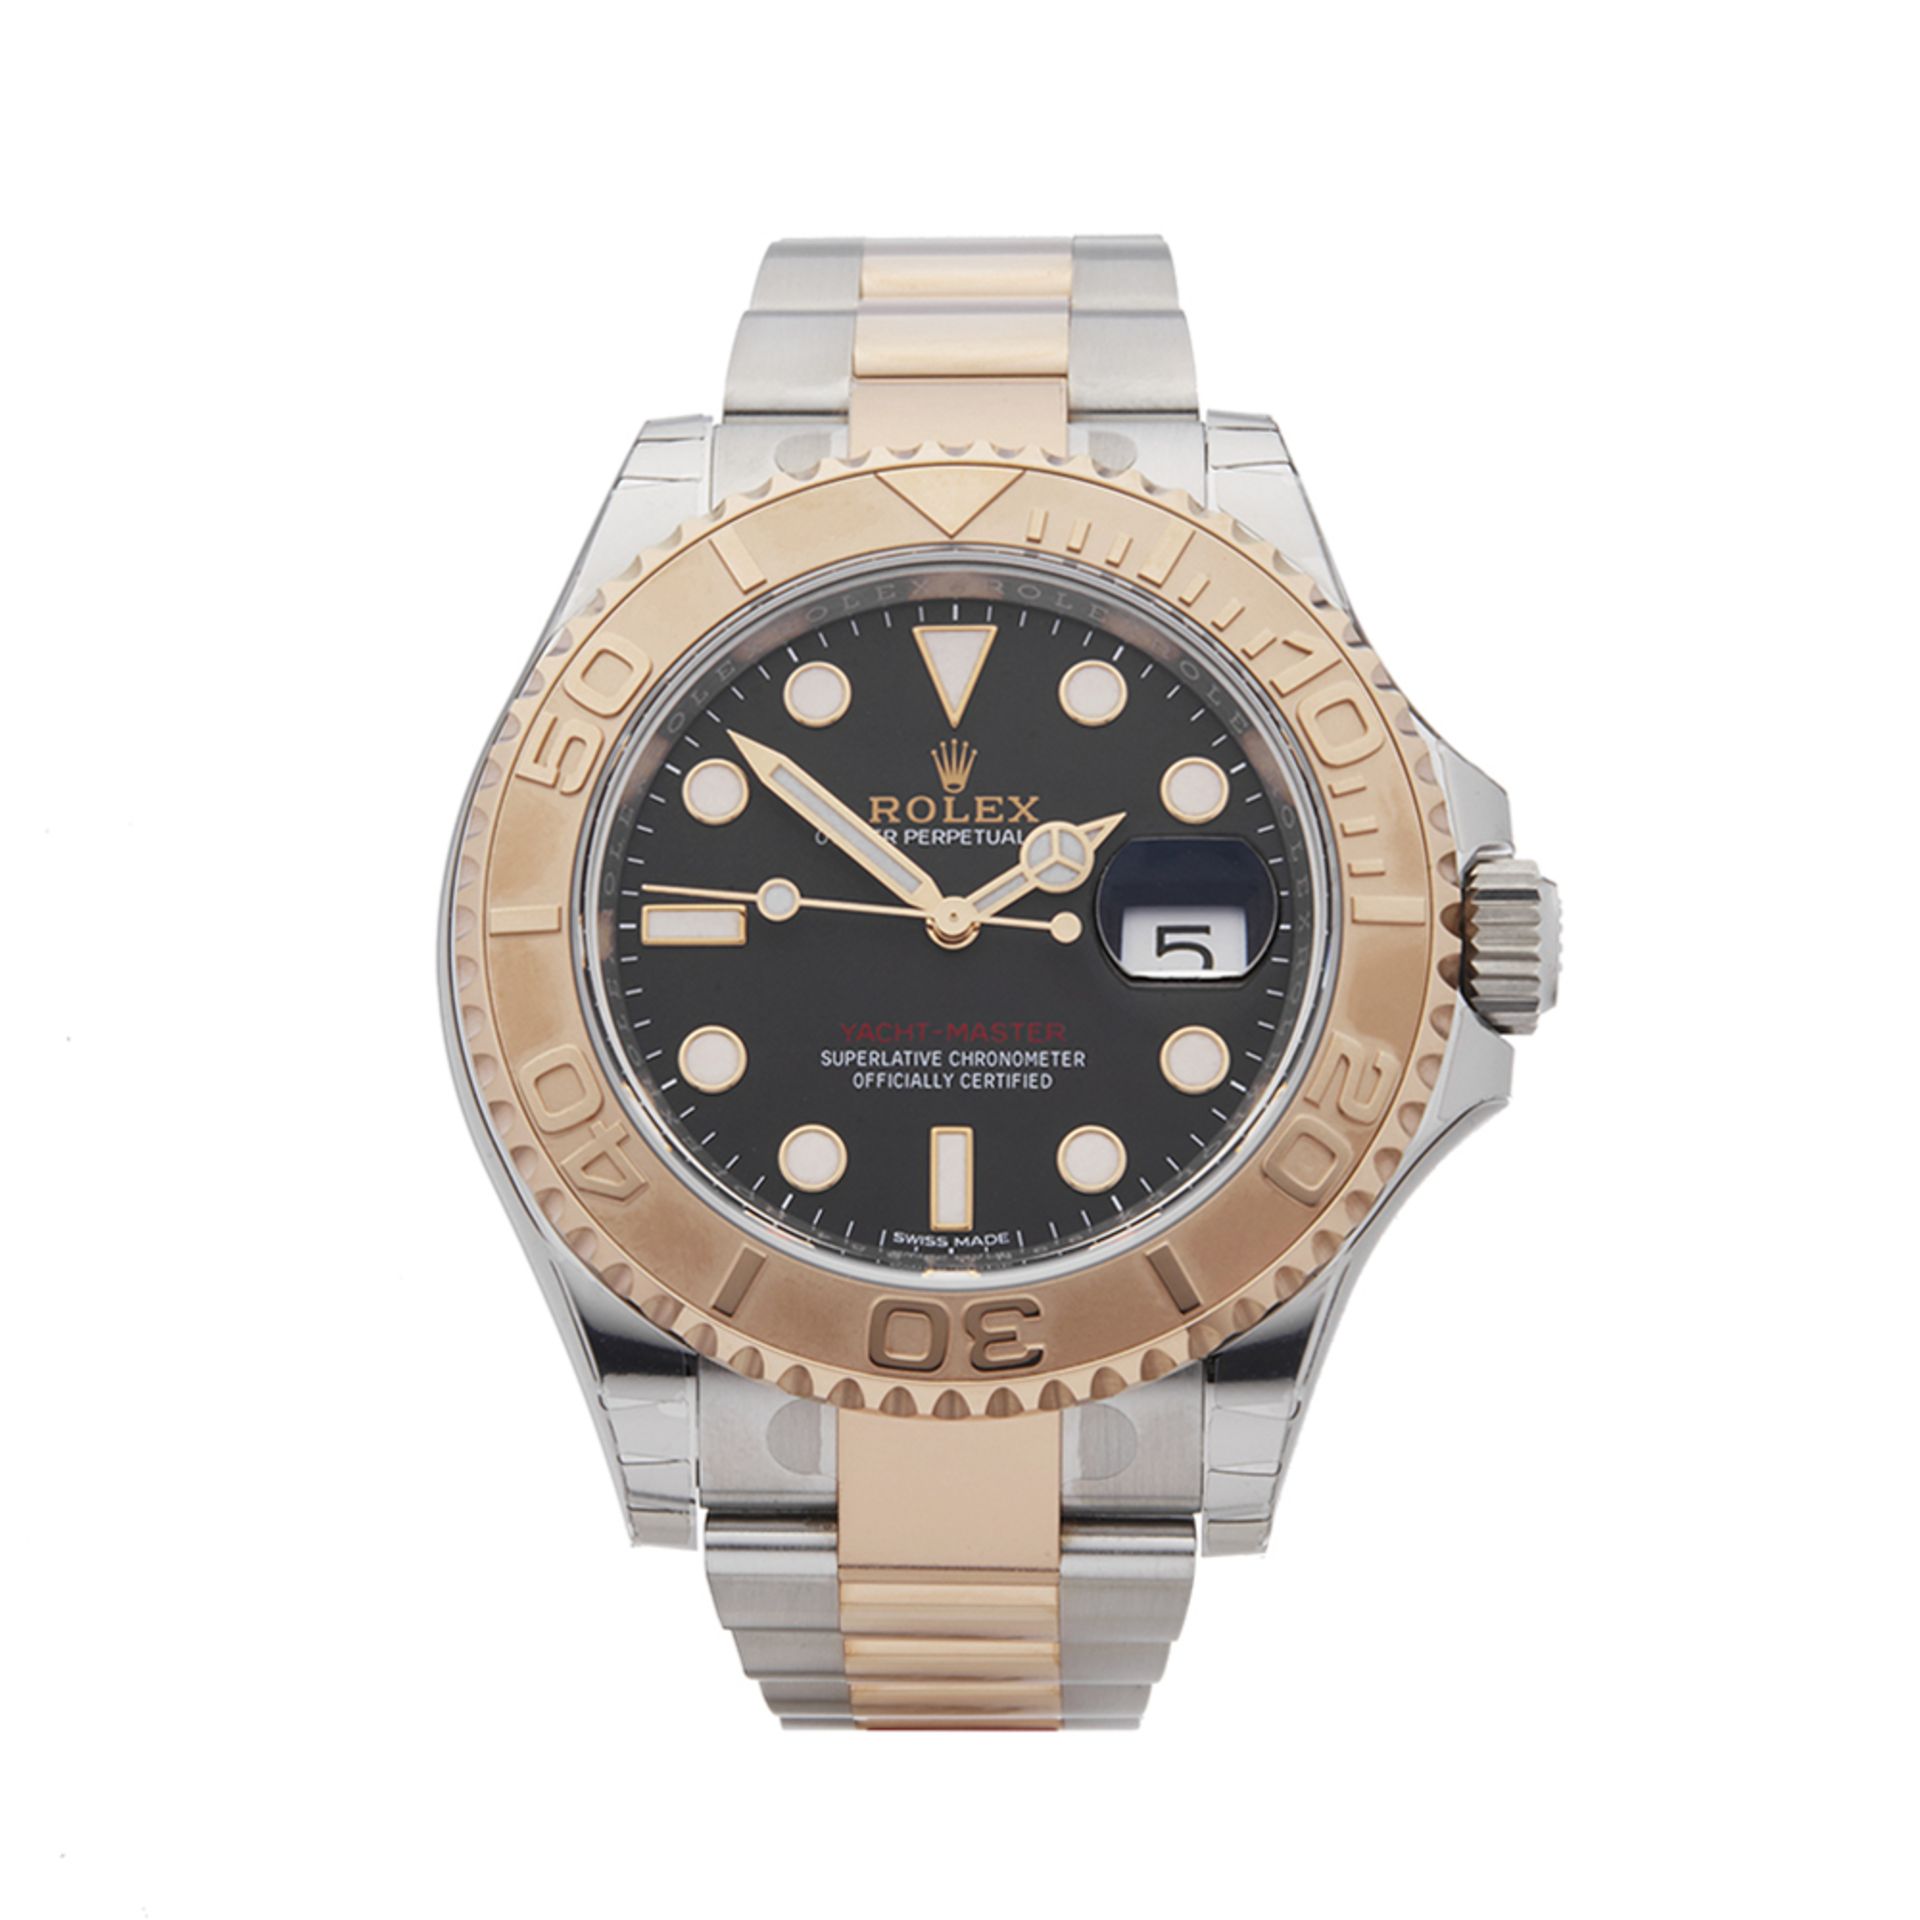 Rolex Yatch Master Stainless Steel & 18k Yellow Gold - 116621 - Image 2 of 7